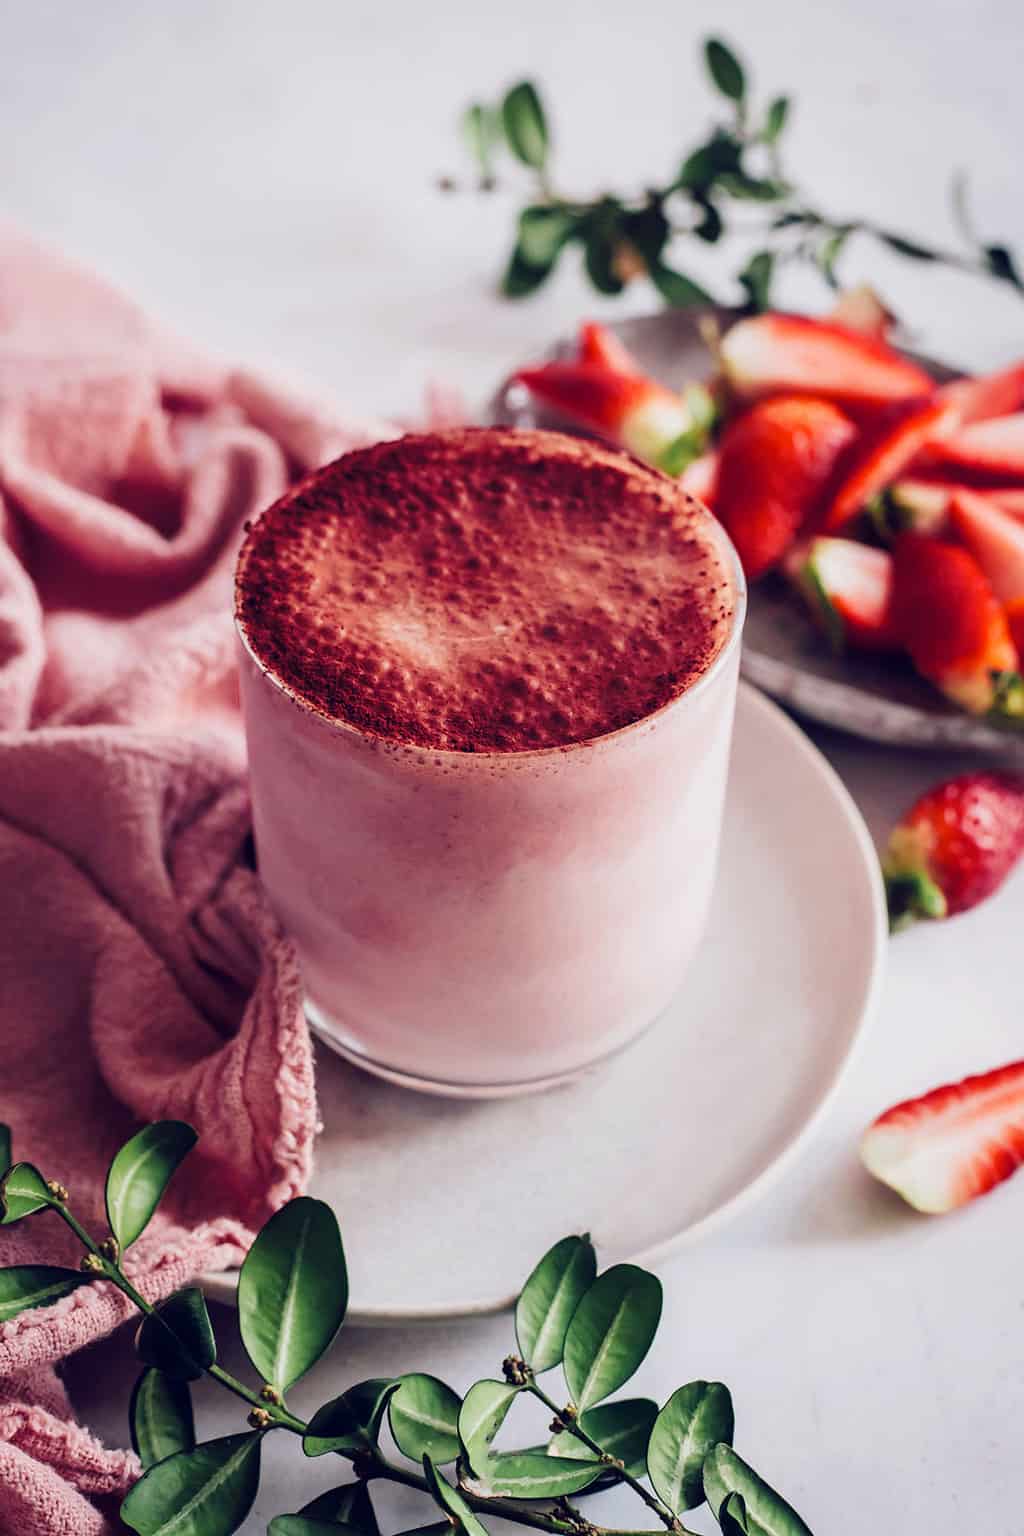 12 All-Natural Pink and Red Recipes That Are Still a Treat - Chocolate Strawberry Smoothie from Hello Glow